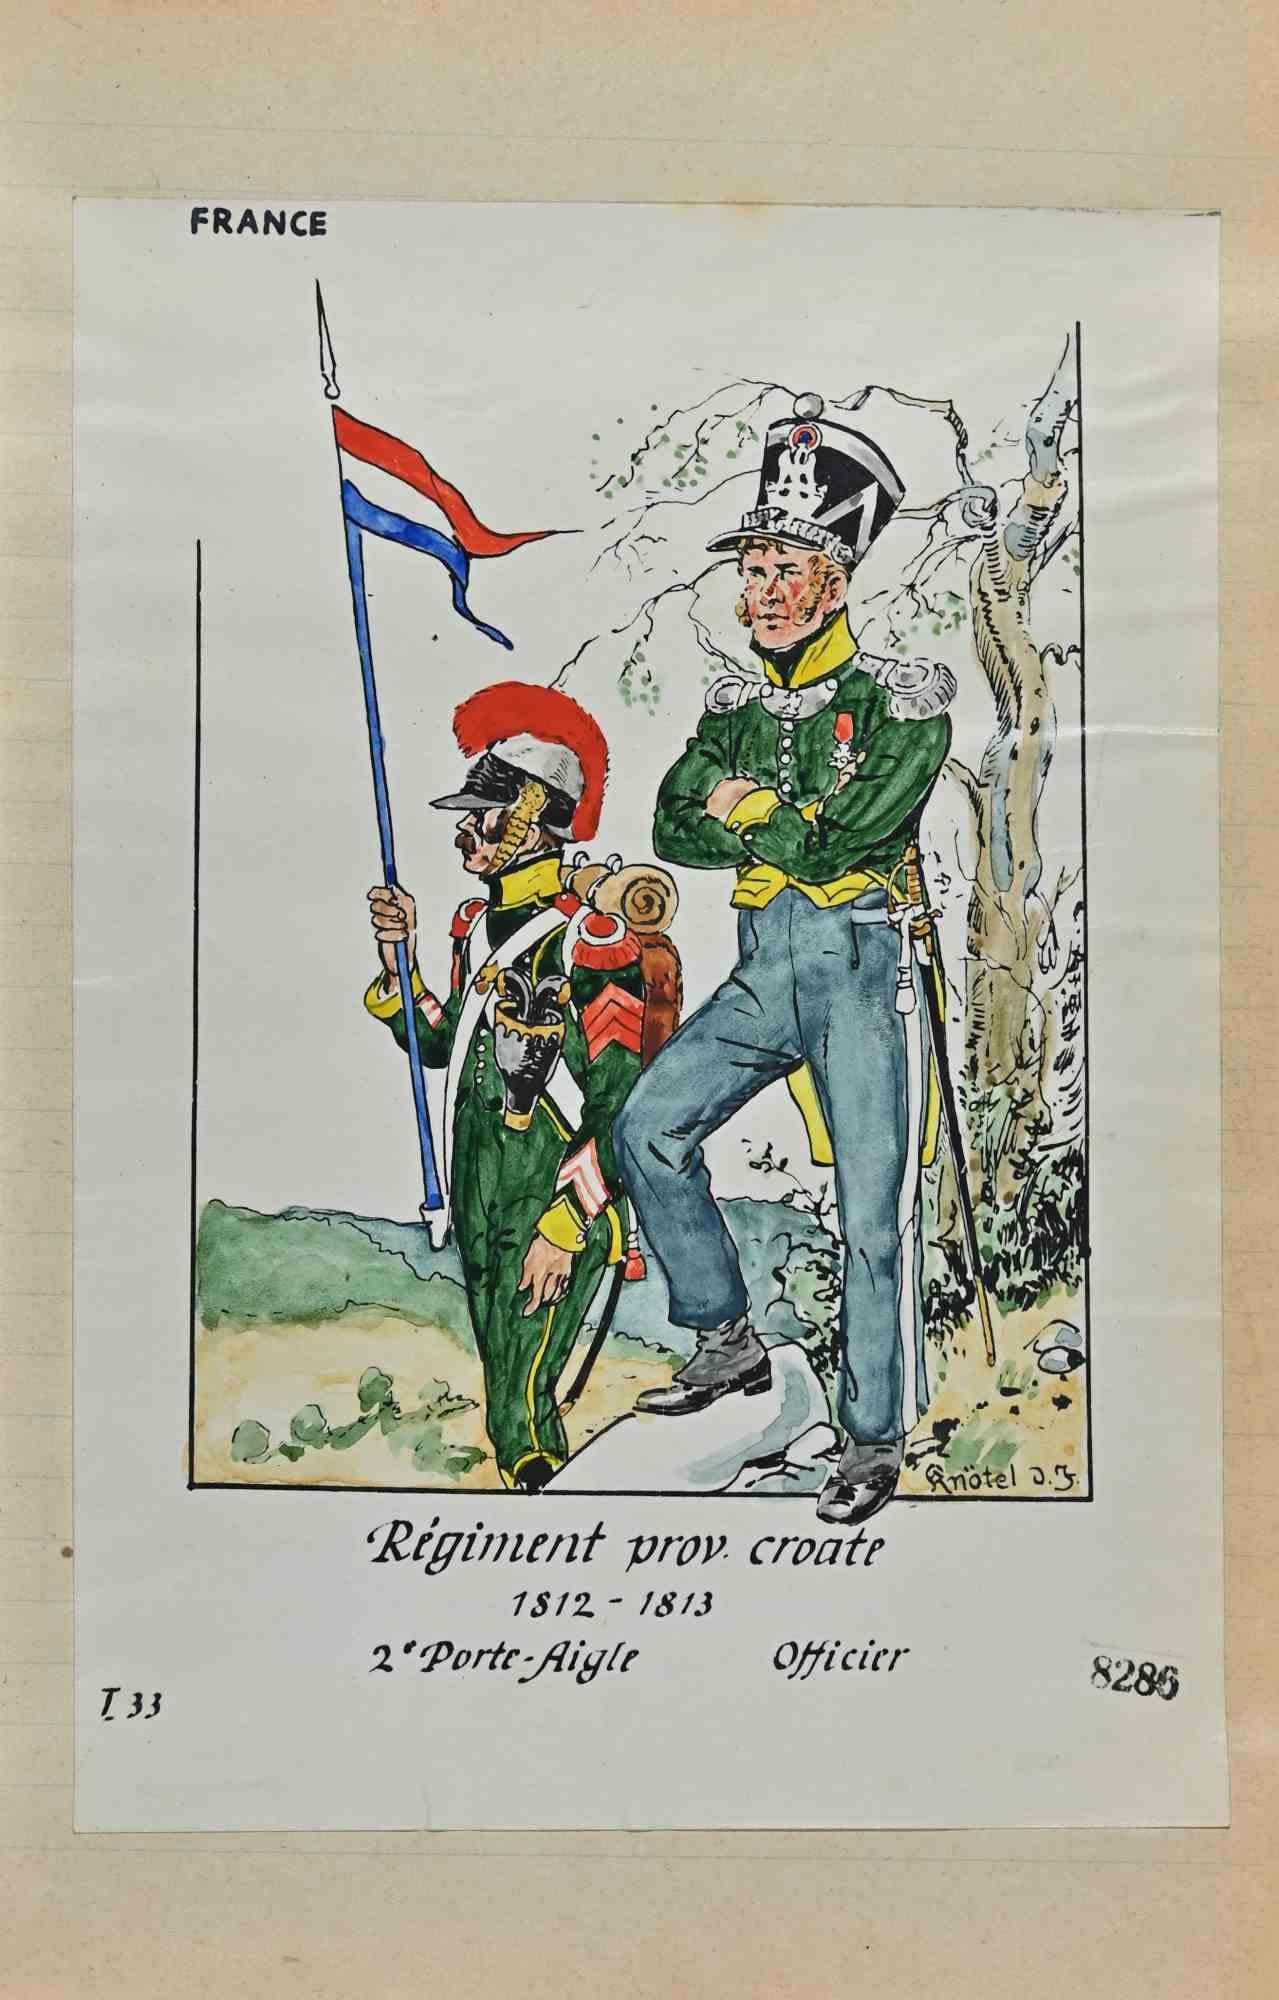 Regiment Prov. Croate (French Army) - Original Drawing By Herbert Knotel - 1940s